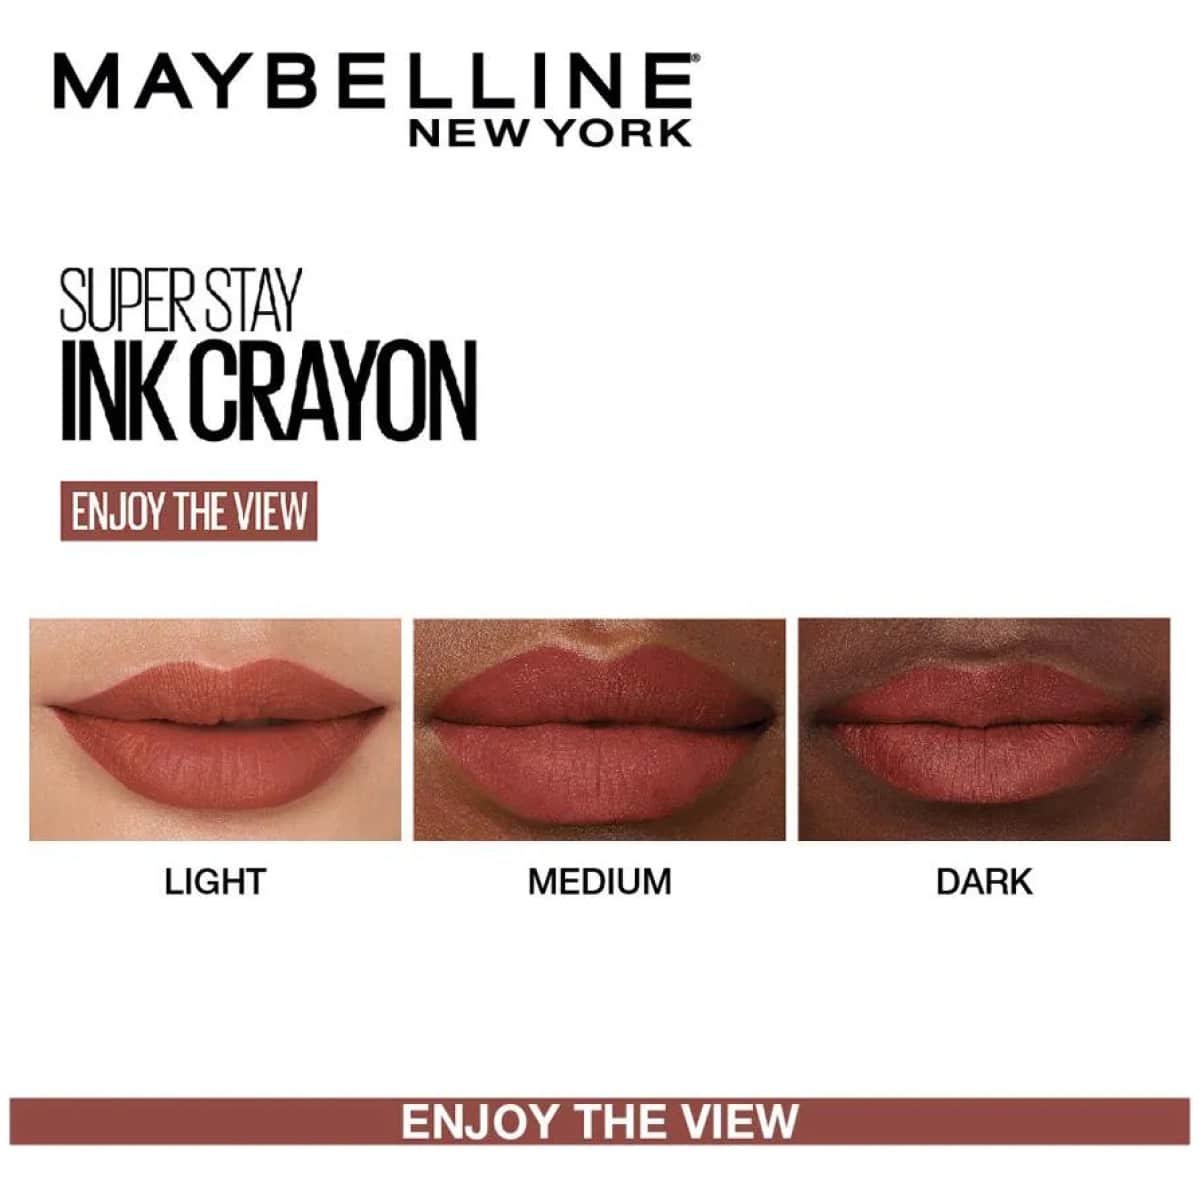 Maybelline New York Super Stay Crayon Lipstick 20 Enjoy The View